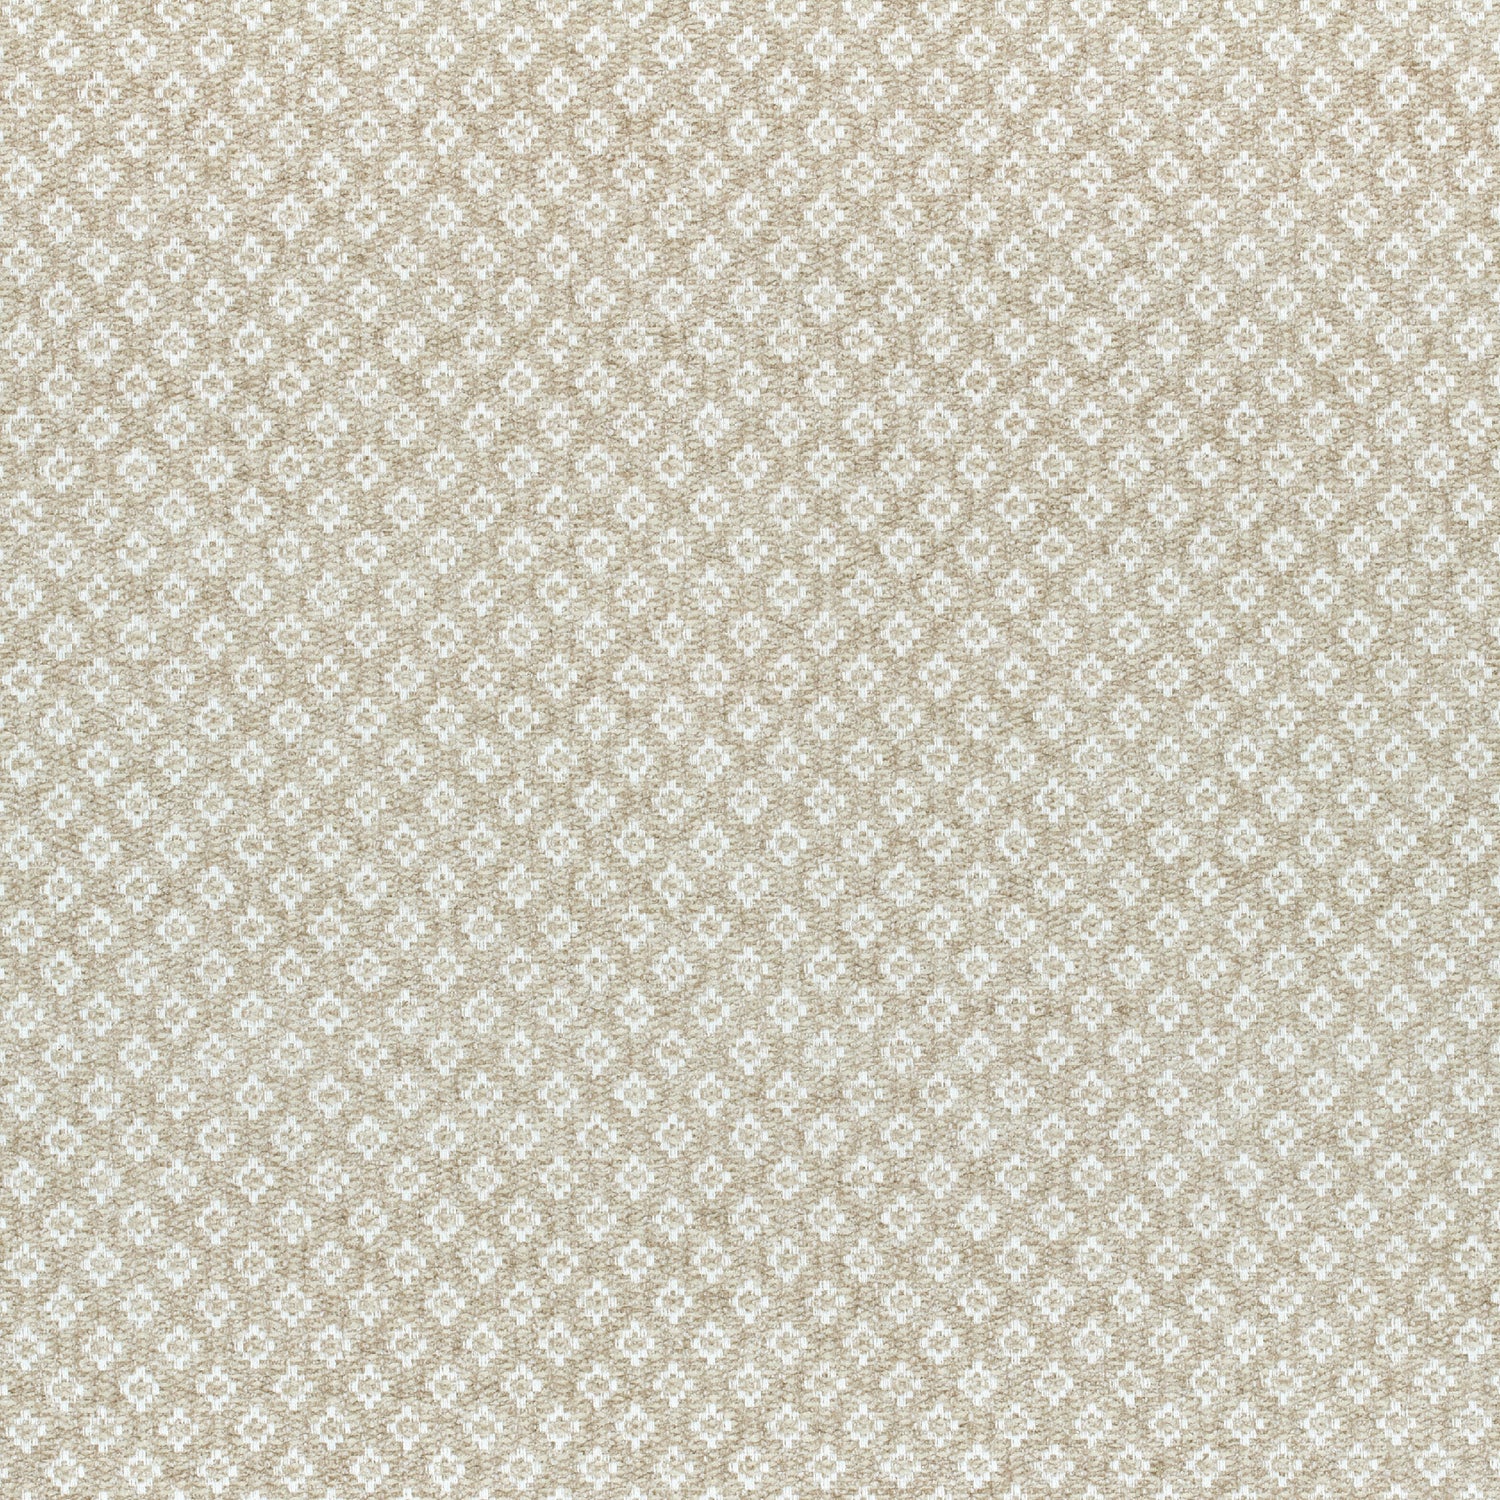 Claudio fabric in beige color - pattern number AW72970 - by Anna French in the Manor collection